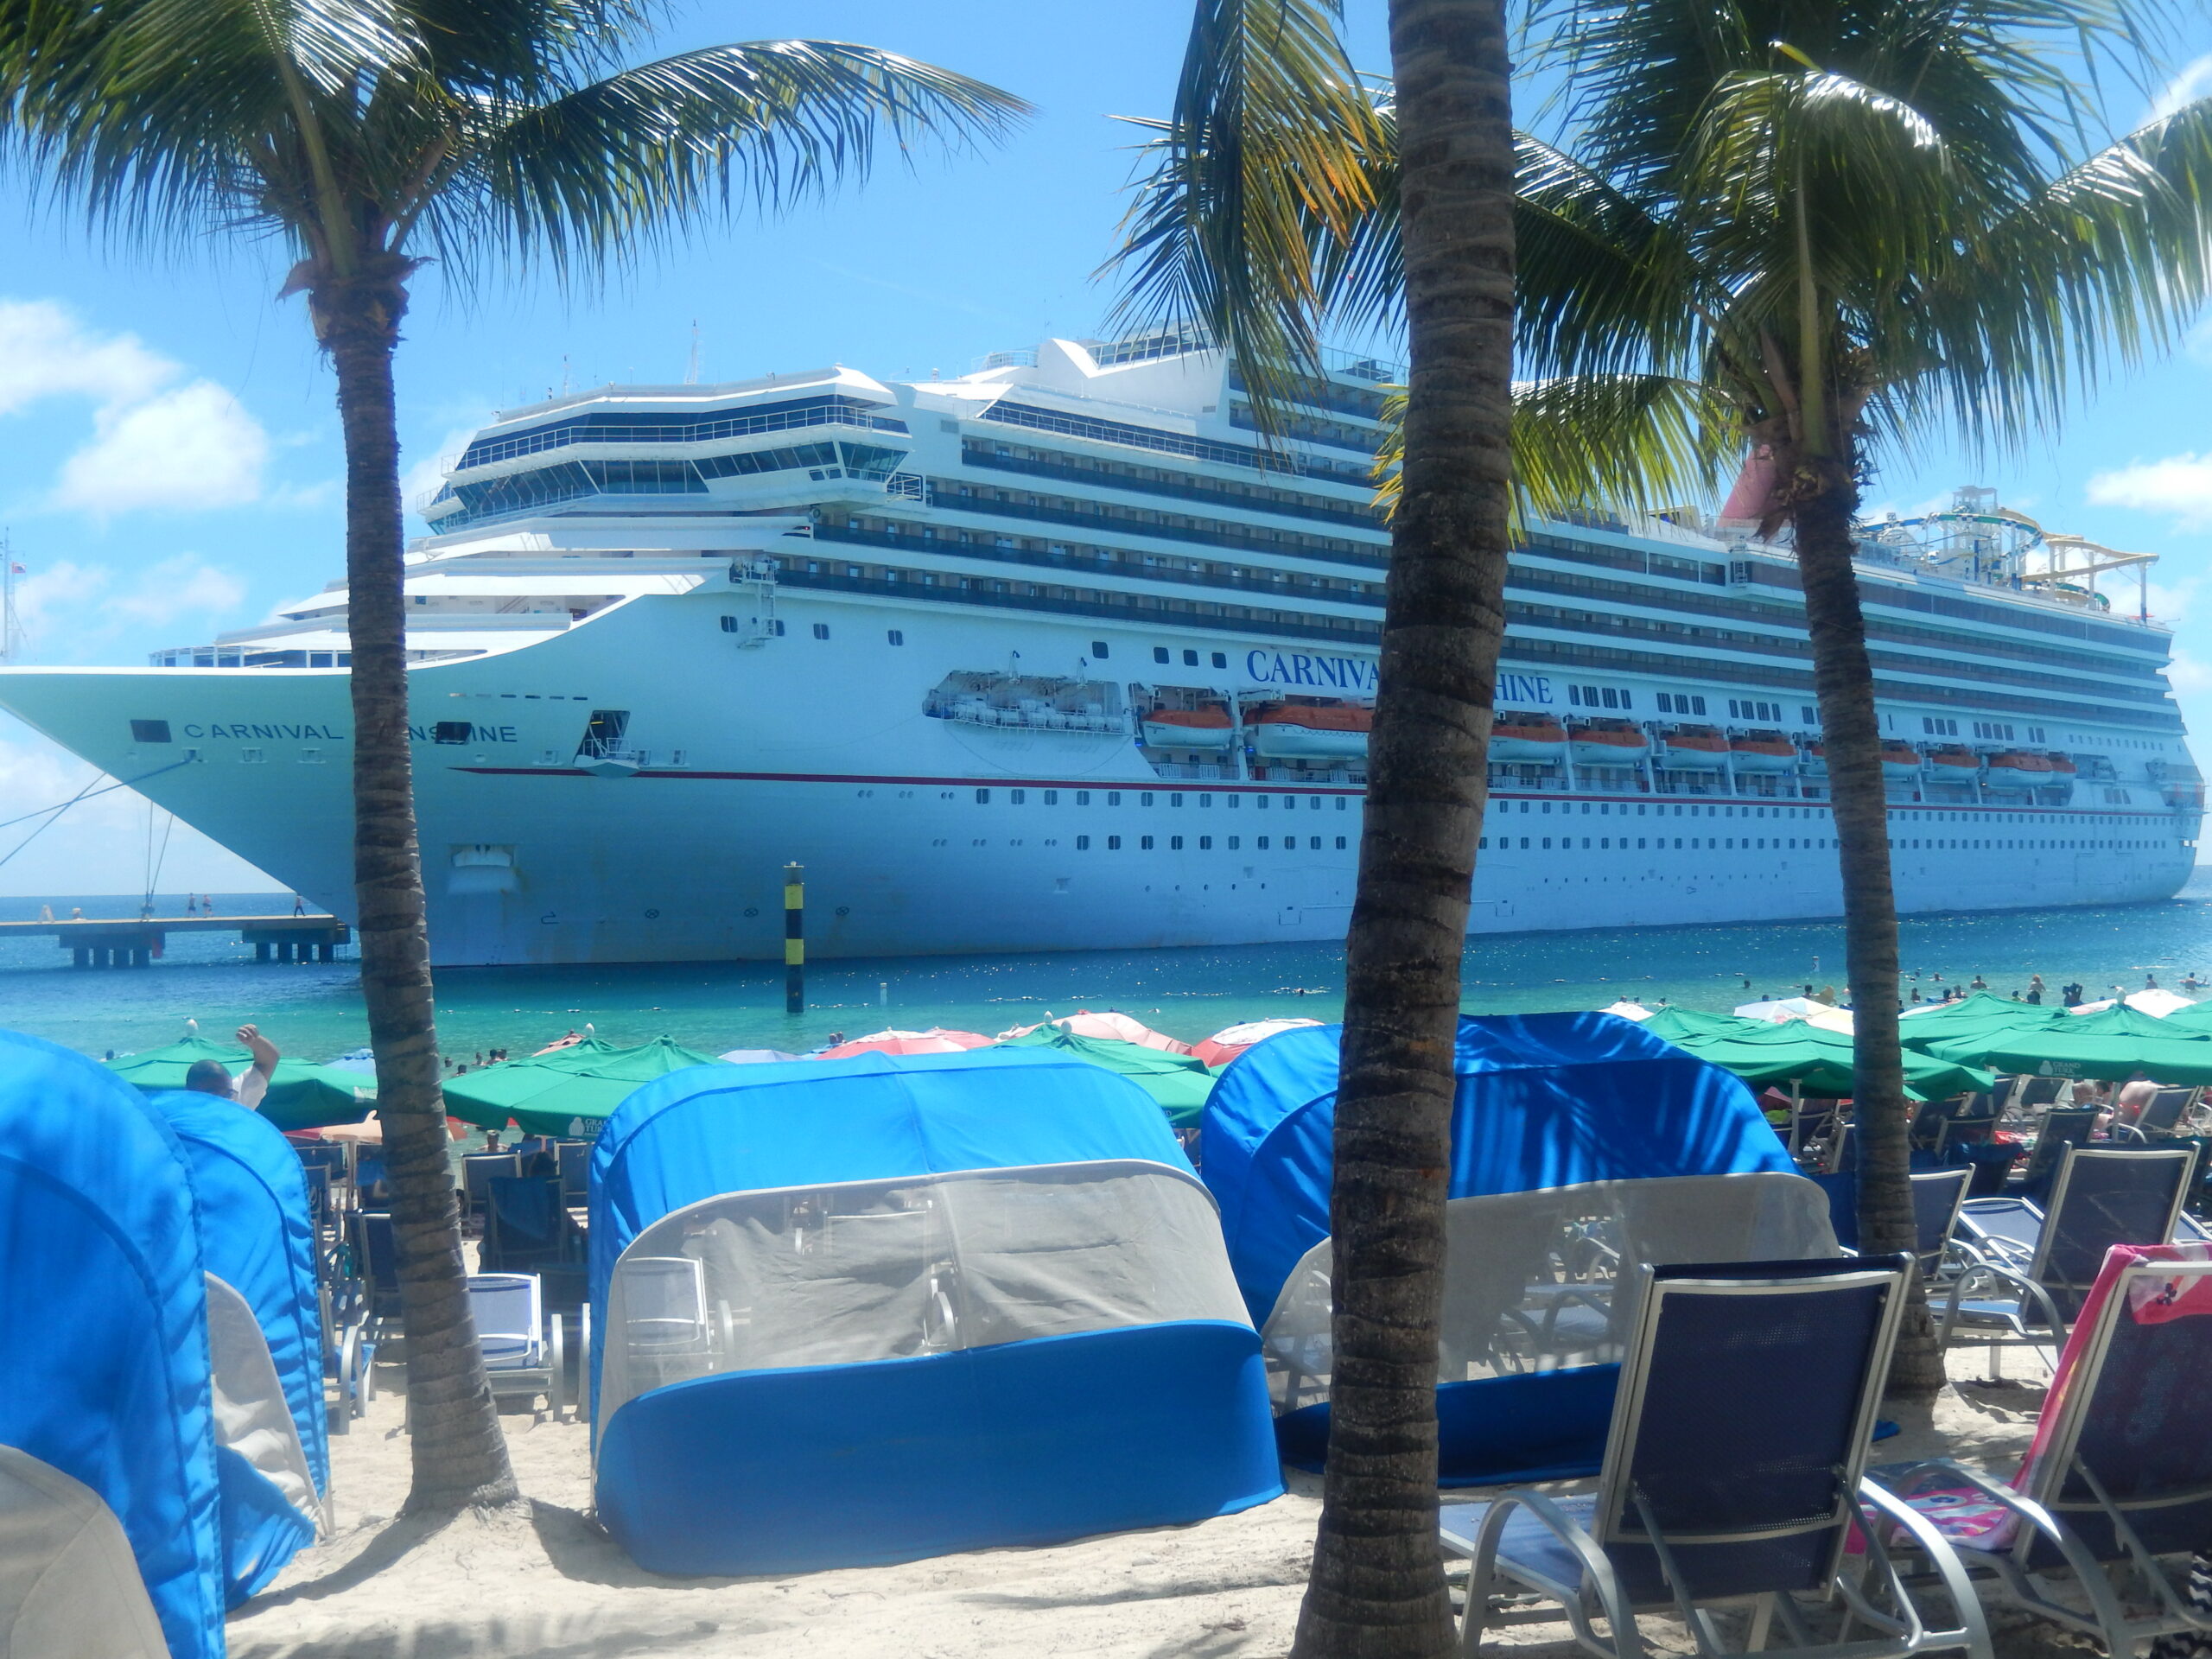 Cruise ship in port of Grand Turk - Turks and Caicos